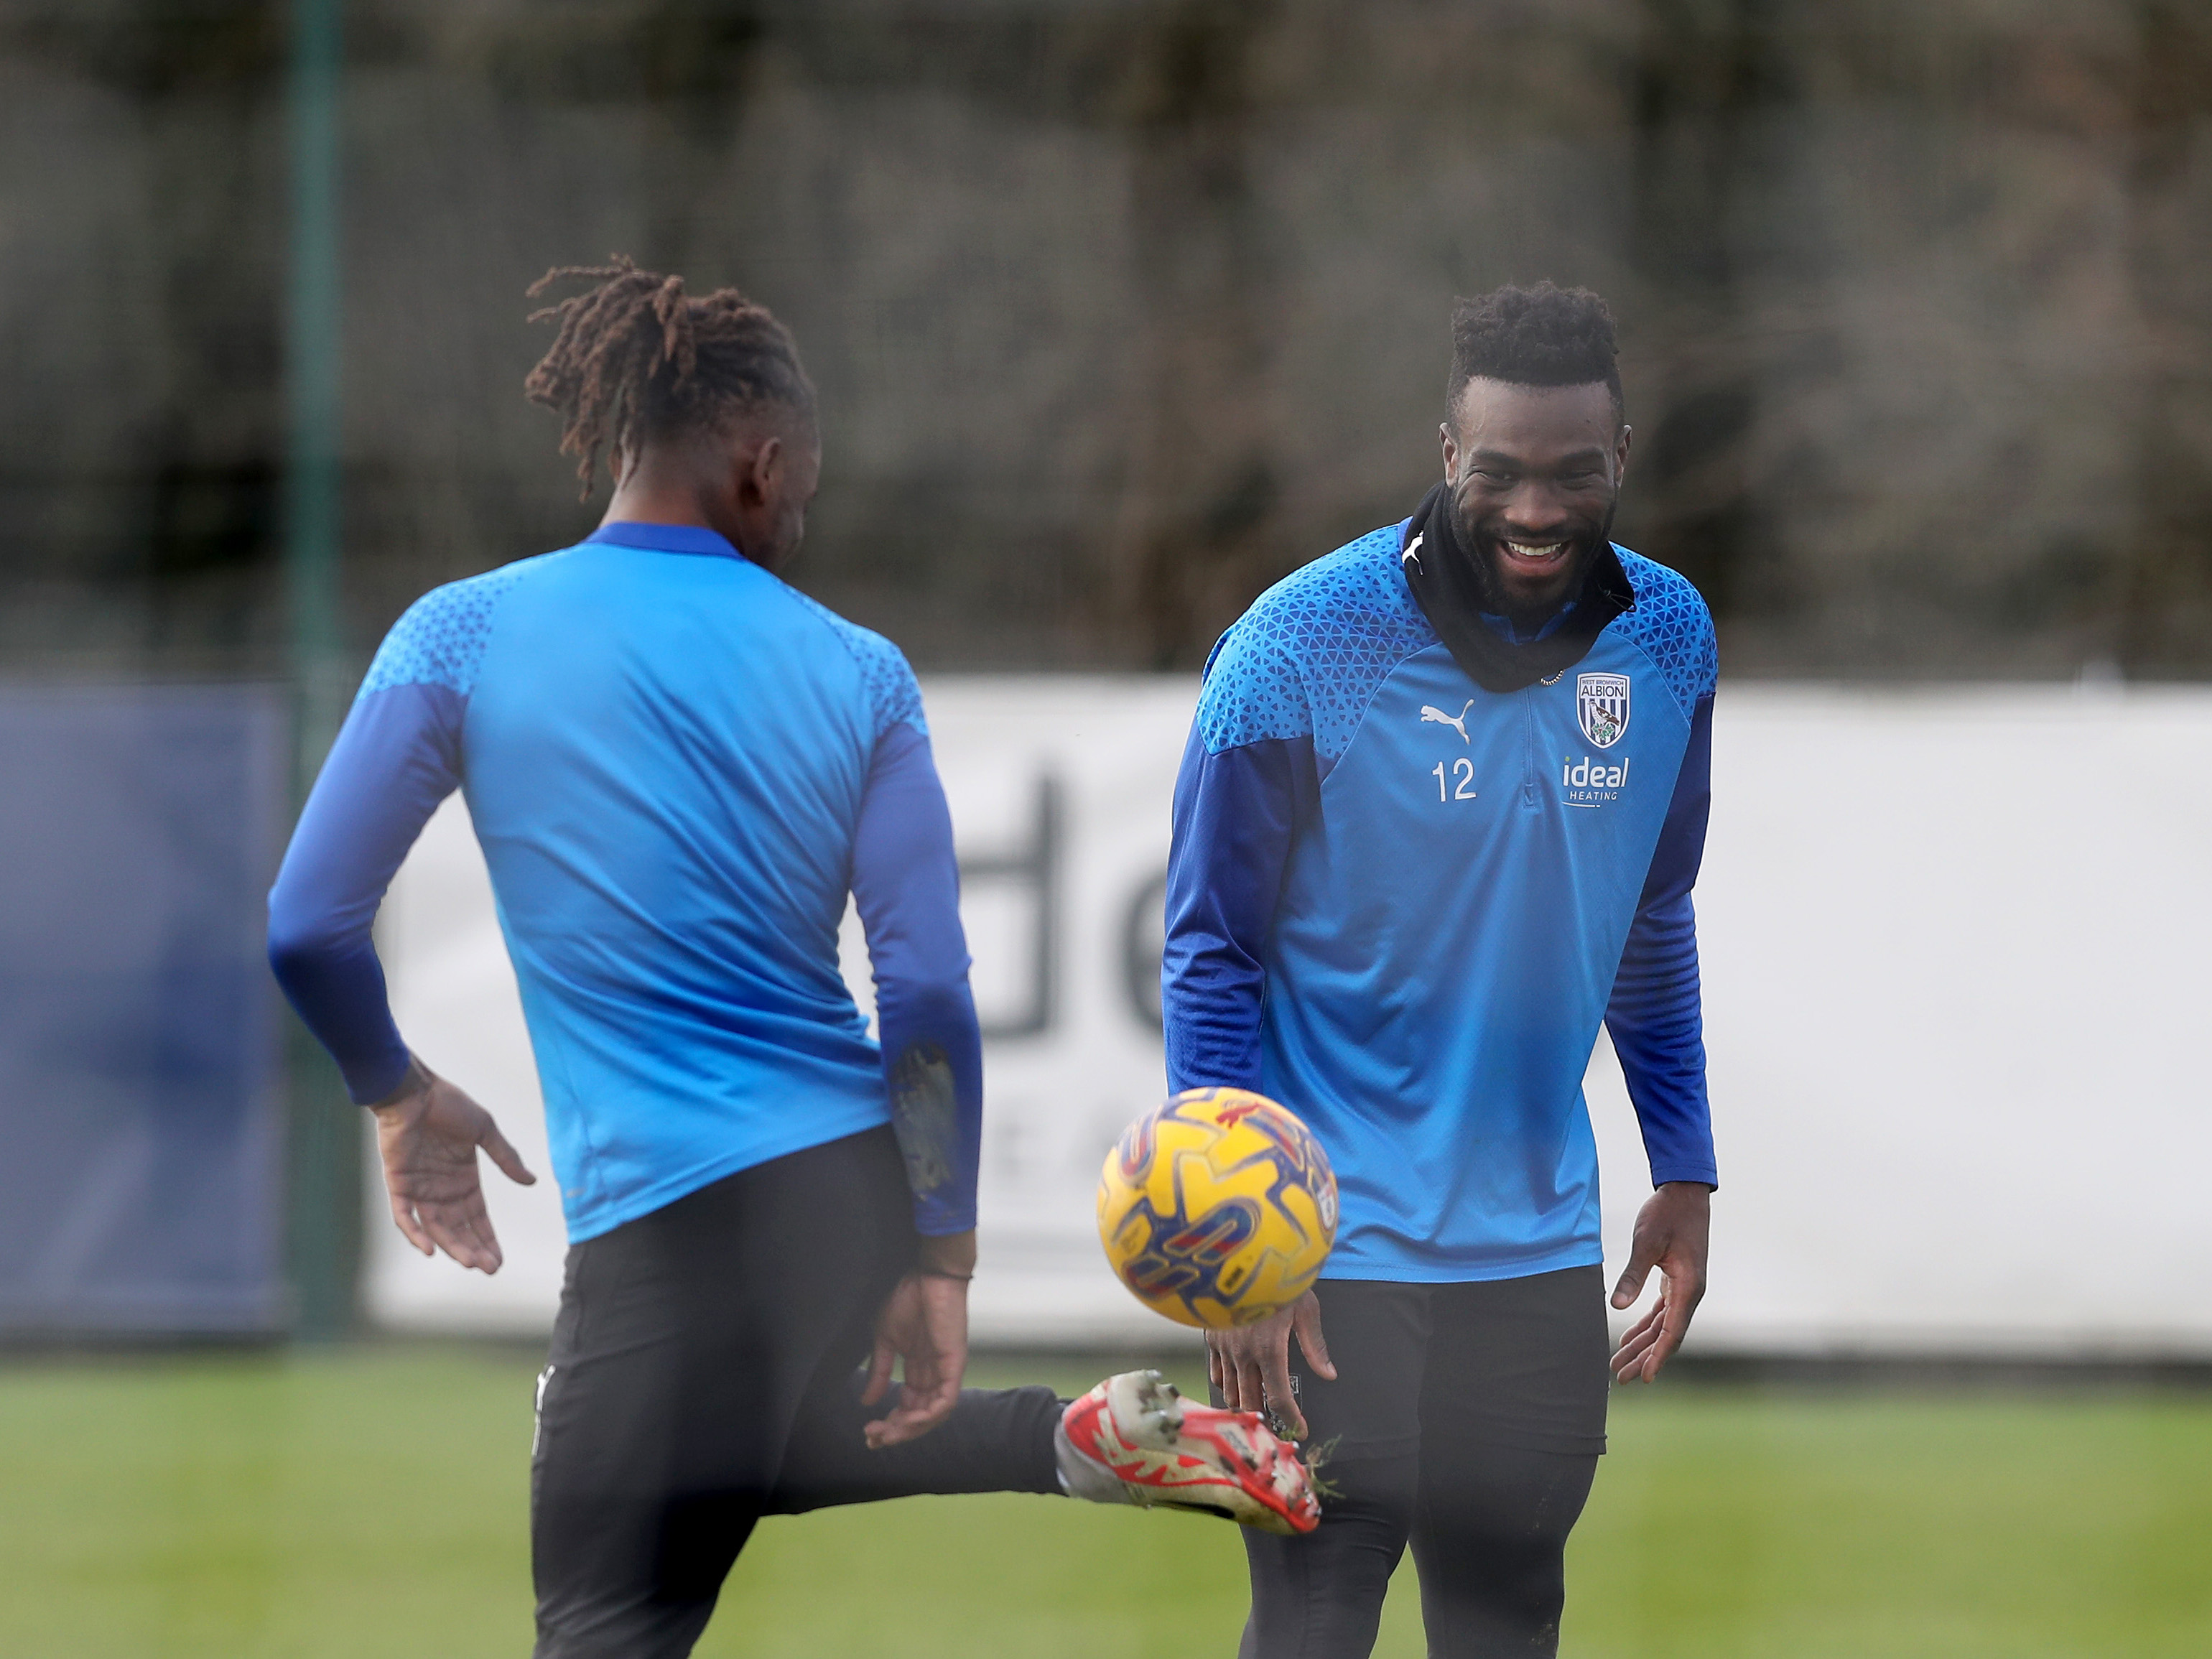 Brandon Thomas-Asante juggles a ball while Daryl Dike watches and laughs during a training session